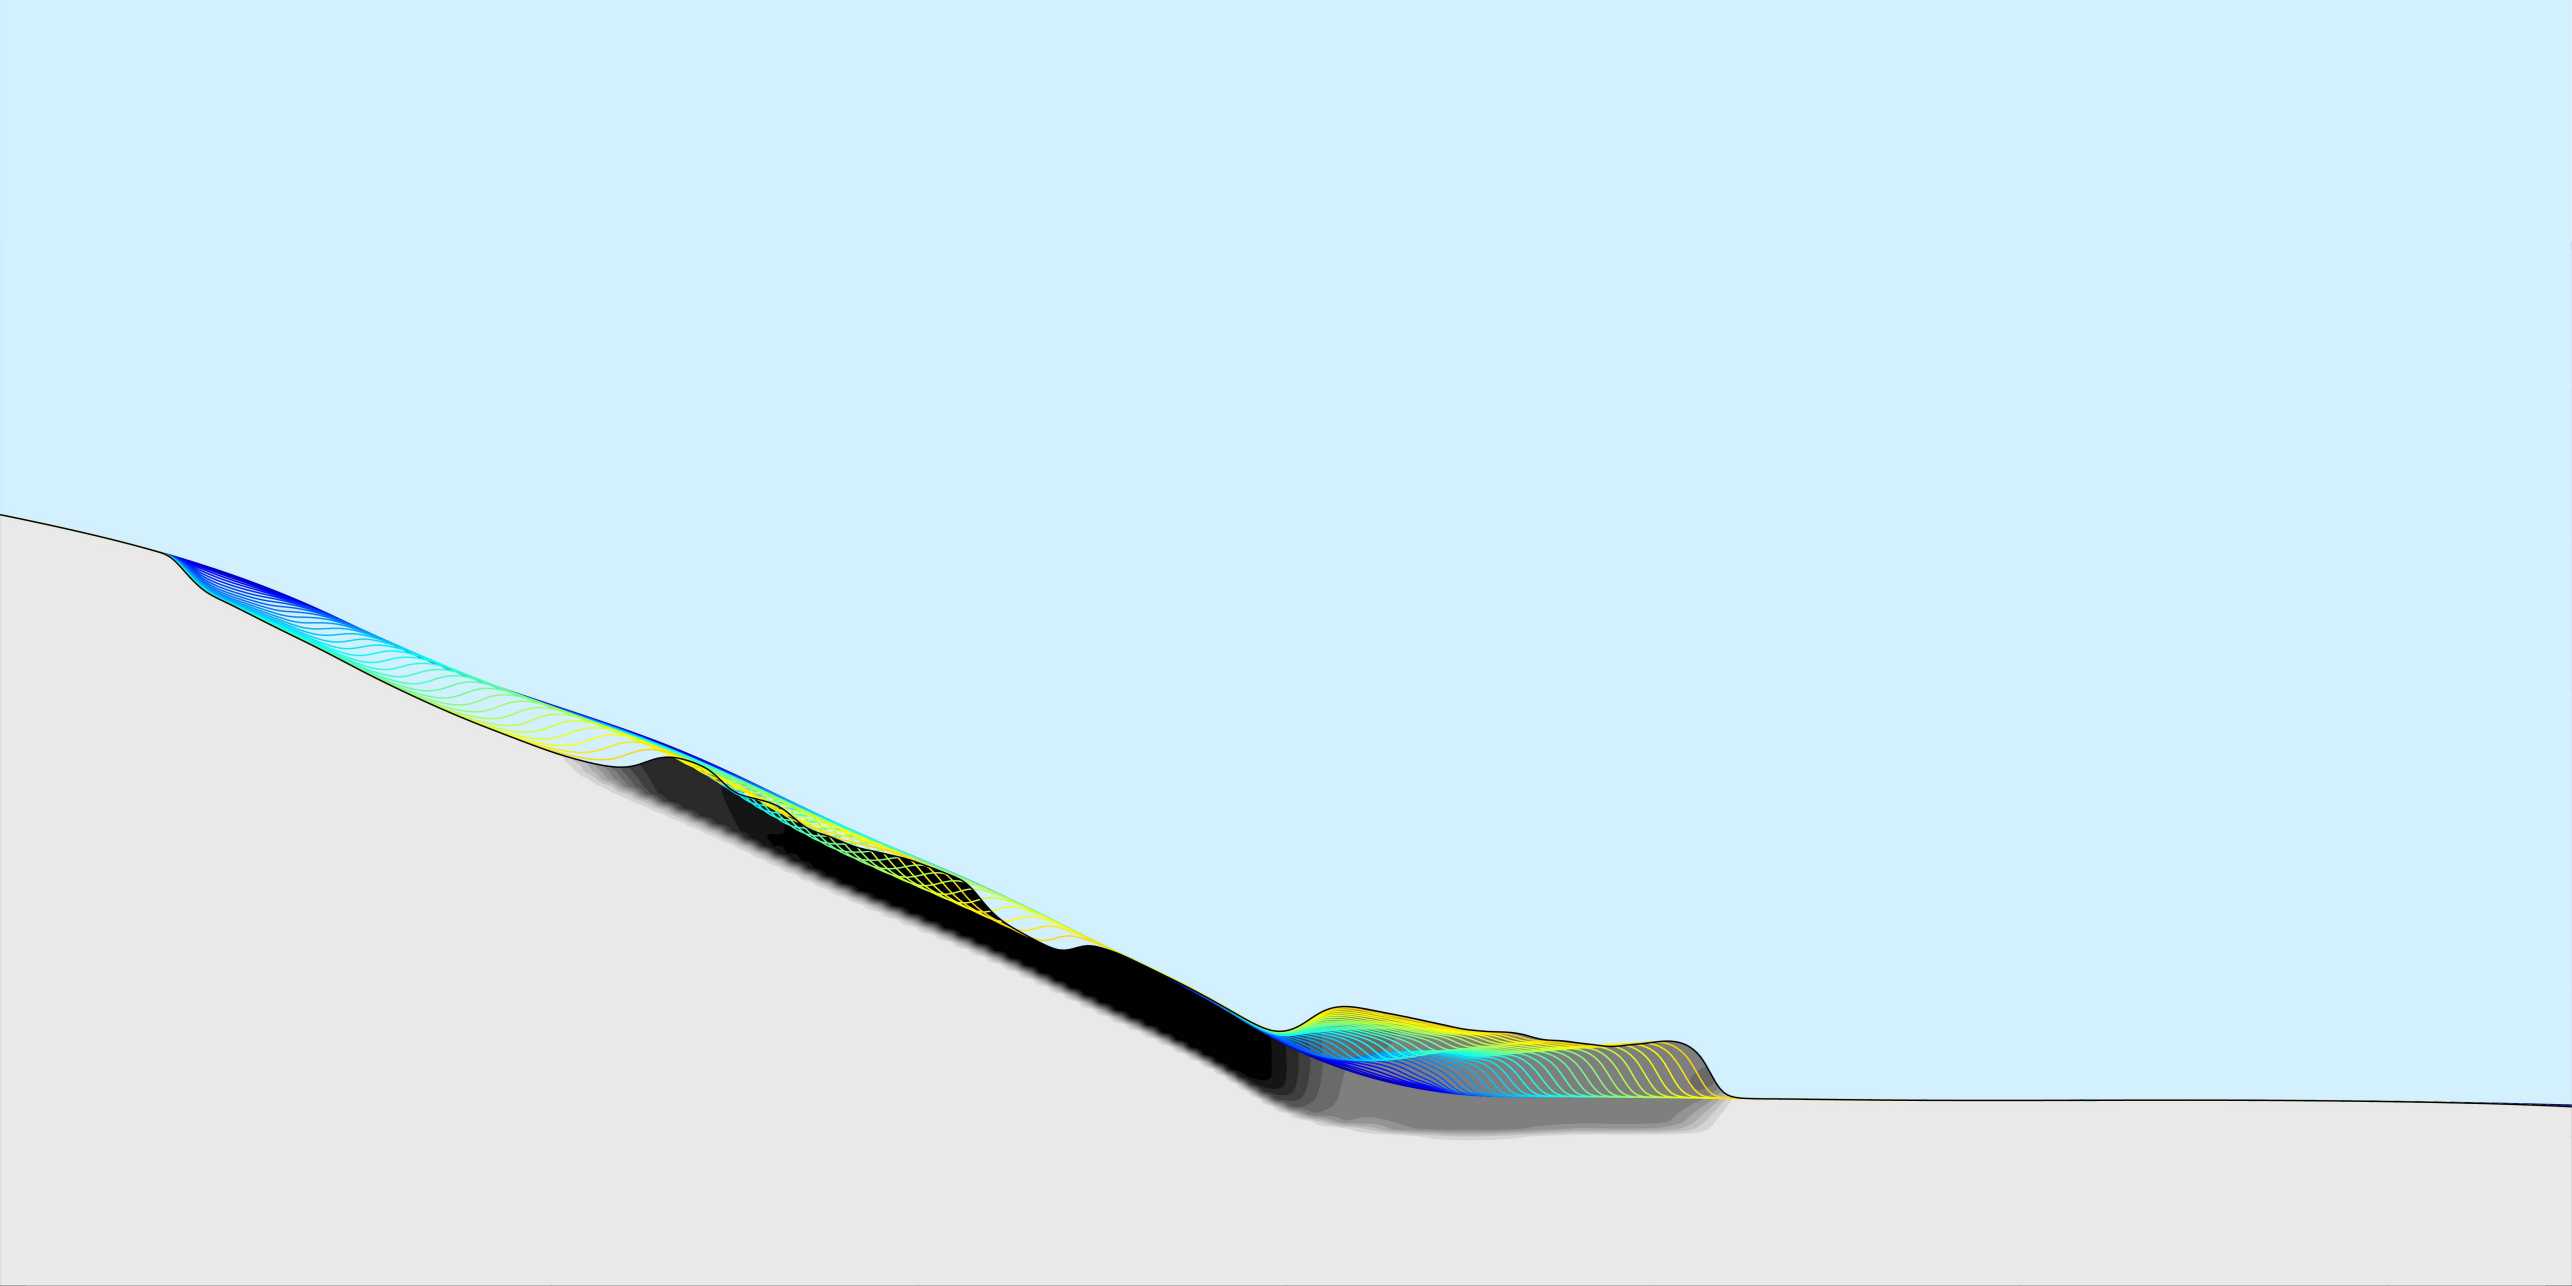 Enlarged view: Illustration of moving soil-water boundary